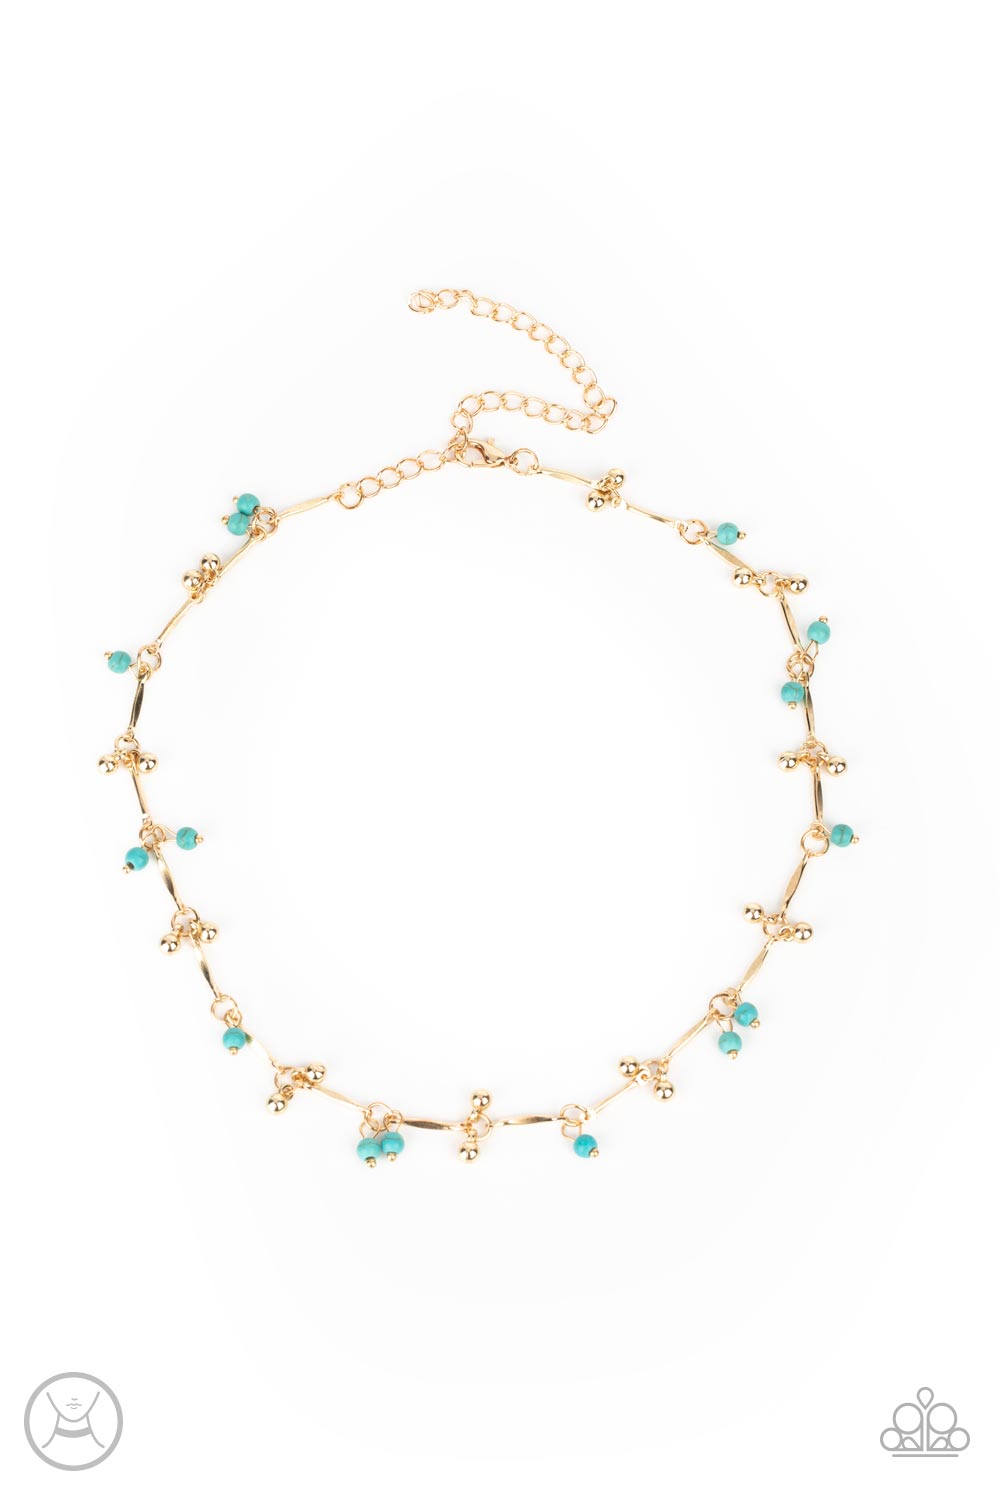 Sahara Social - Gold Choker Paparazzi Accessories with Turquoise beads 